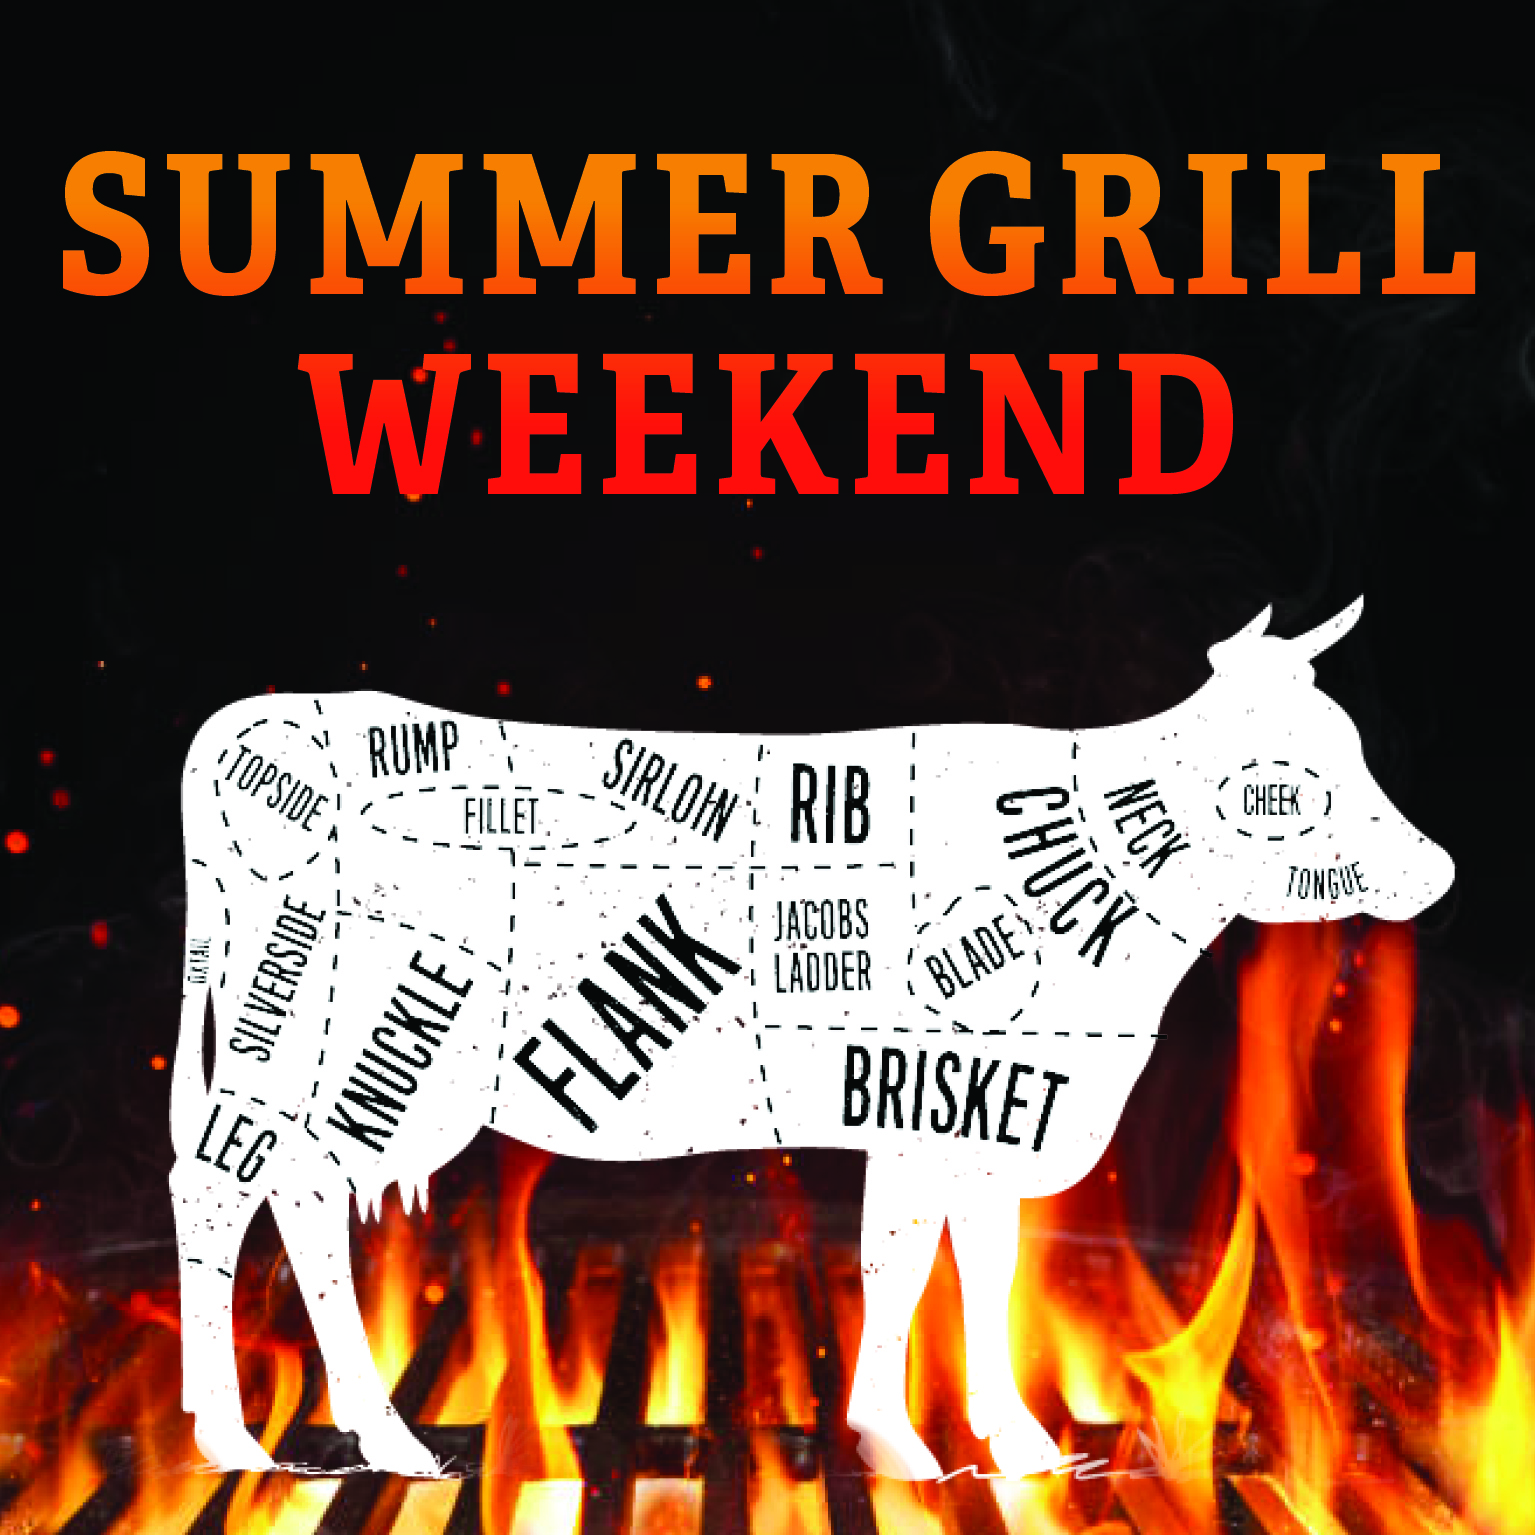 Summer Grilling at The Old Mill